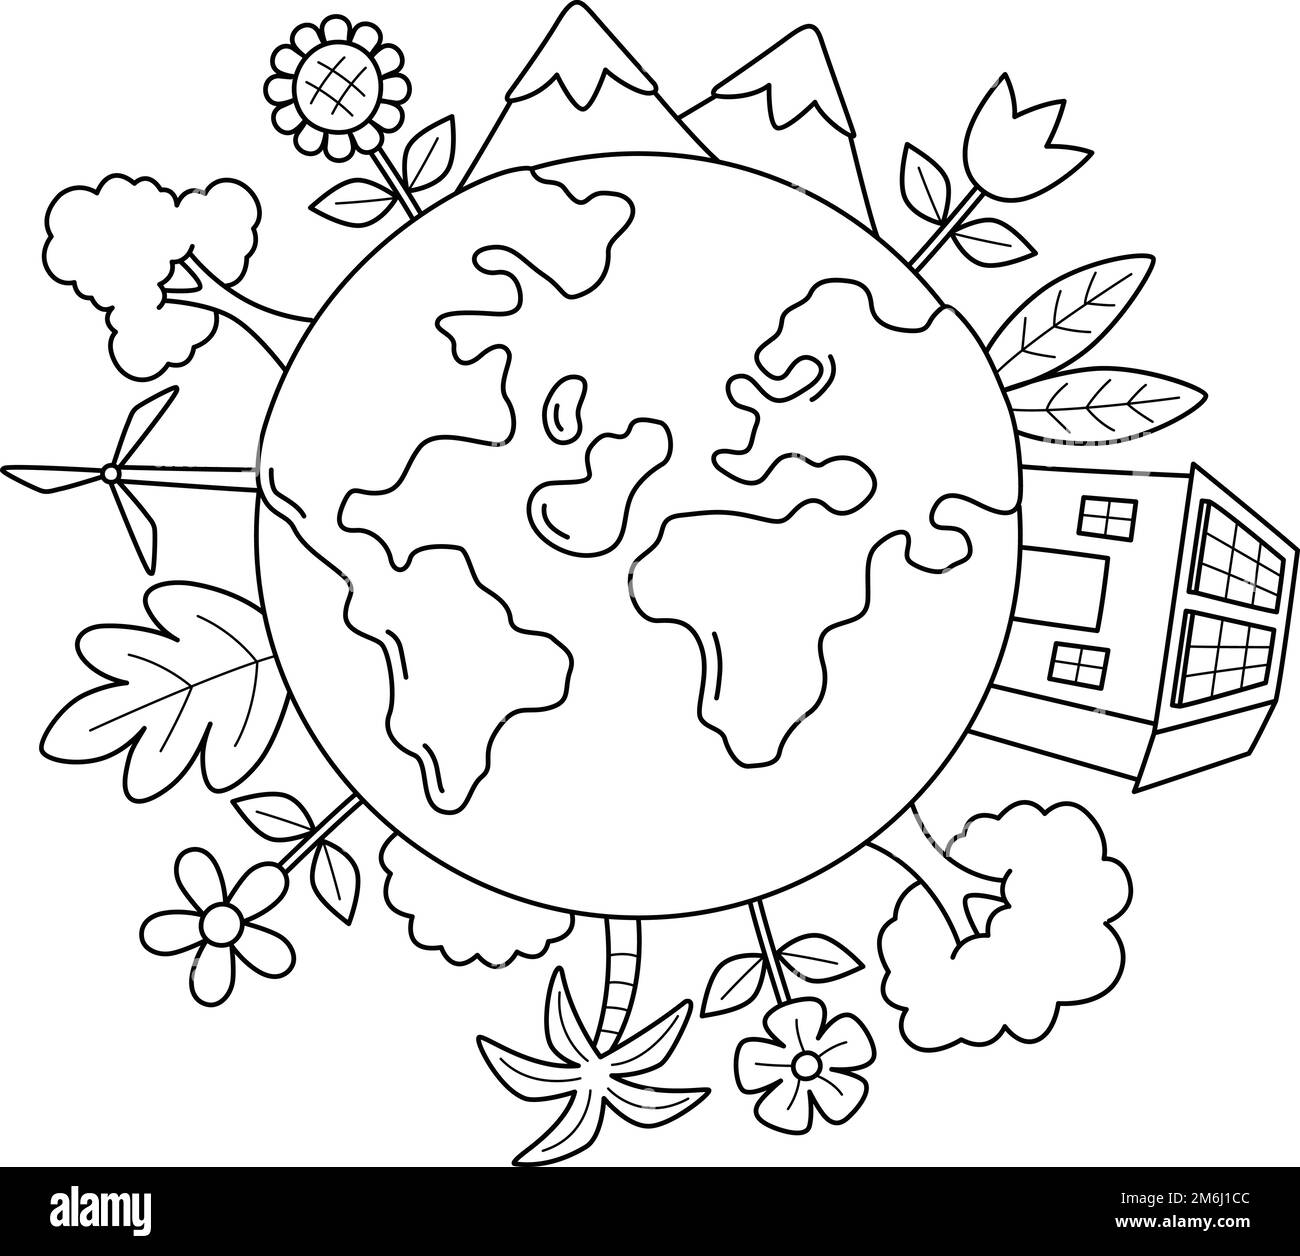 Love Earth Isolated Coloring Page for Kids Stock Vector